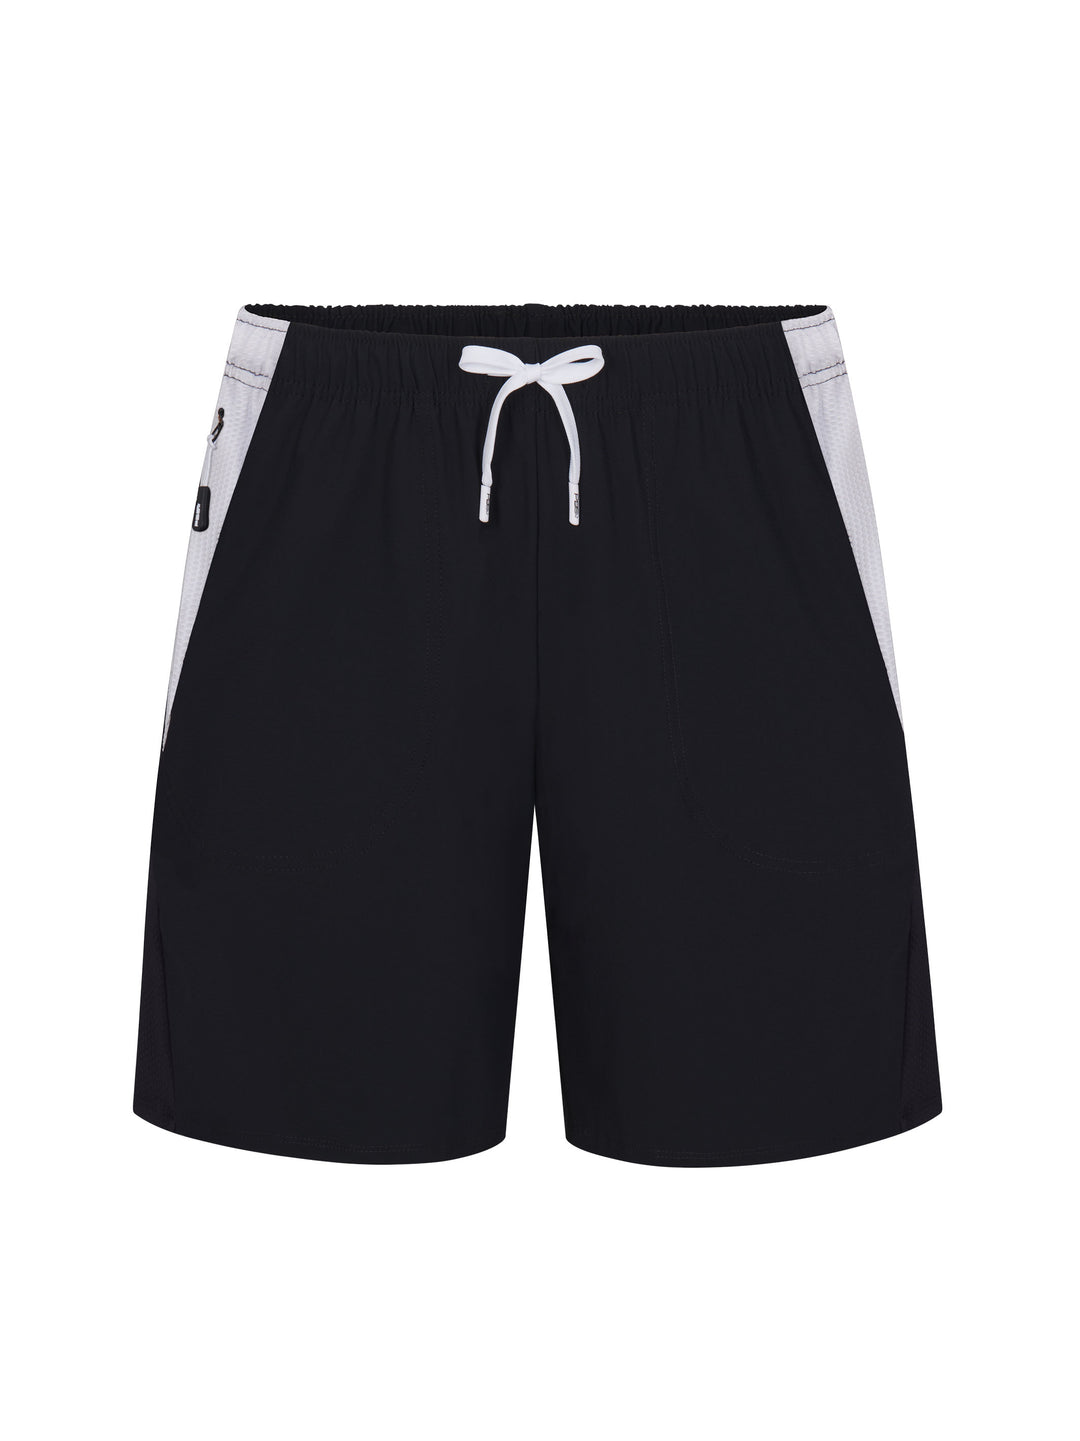 Men's Vented Court Short front view in black with white draw string.